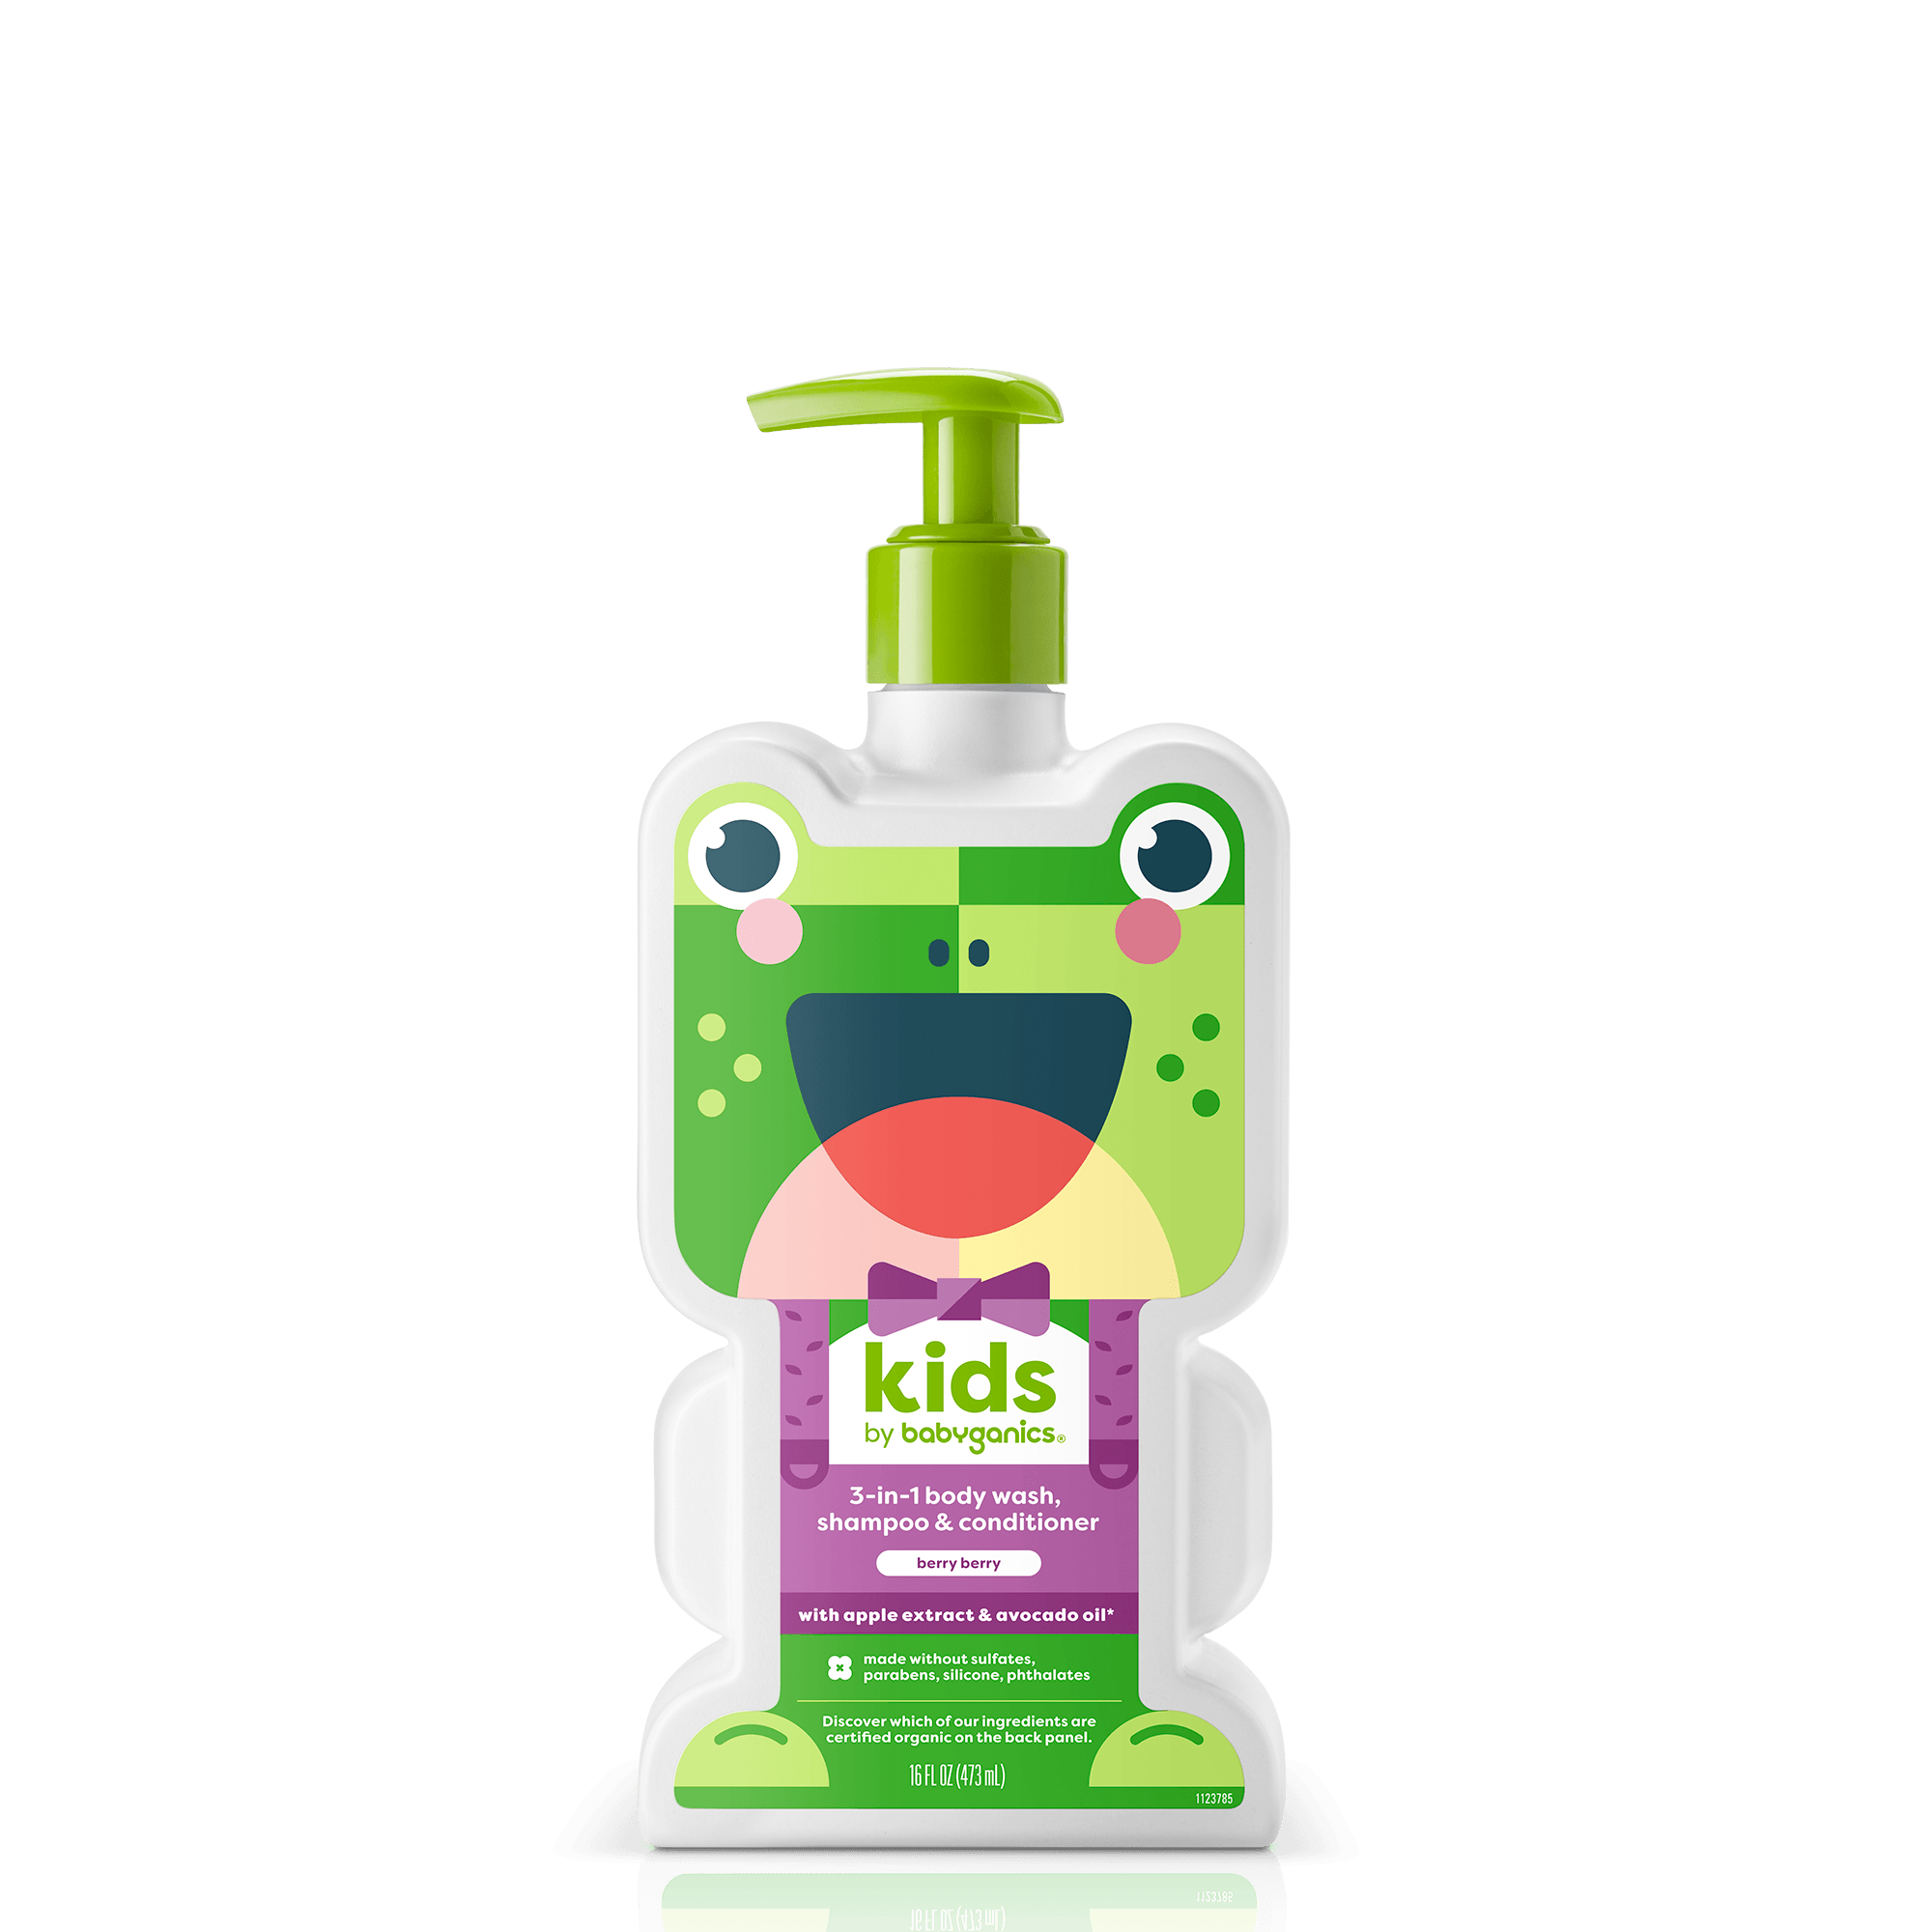 kids 3-in-1 body wash, shampoo & conditioner, berry berry, bottle front